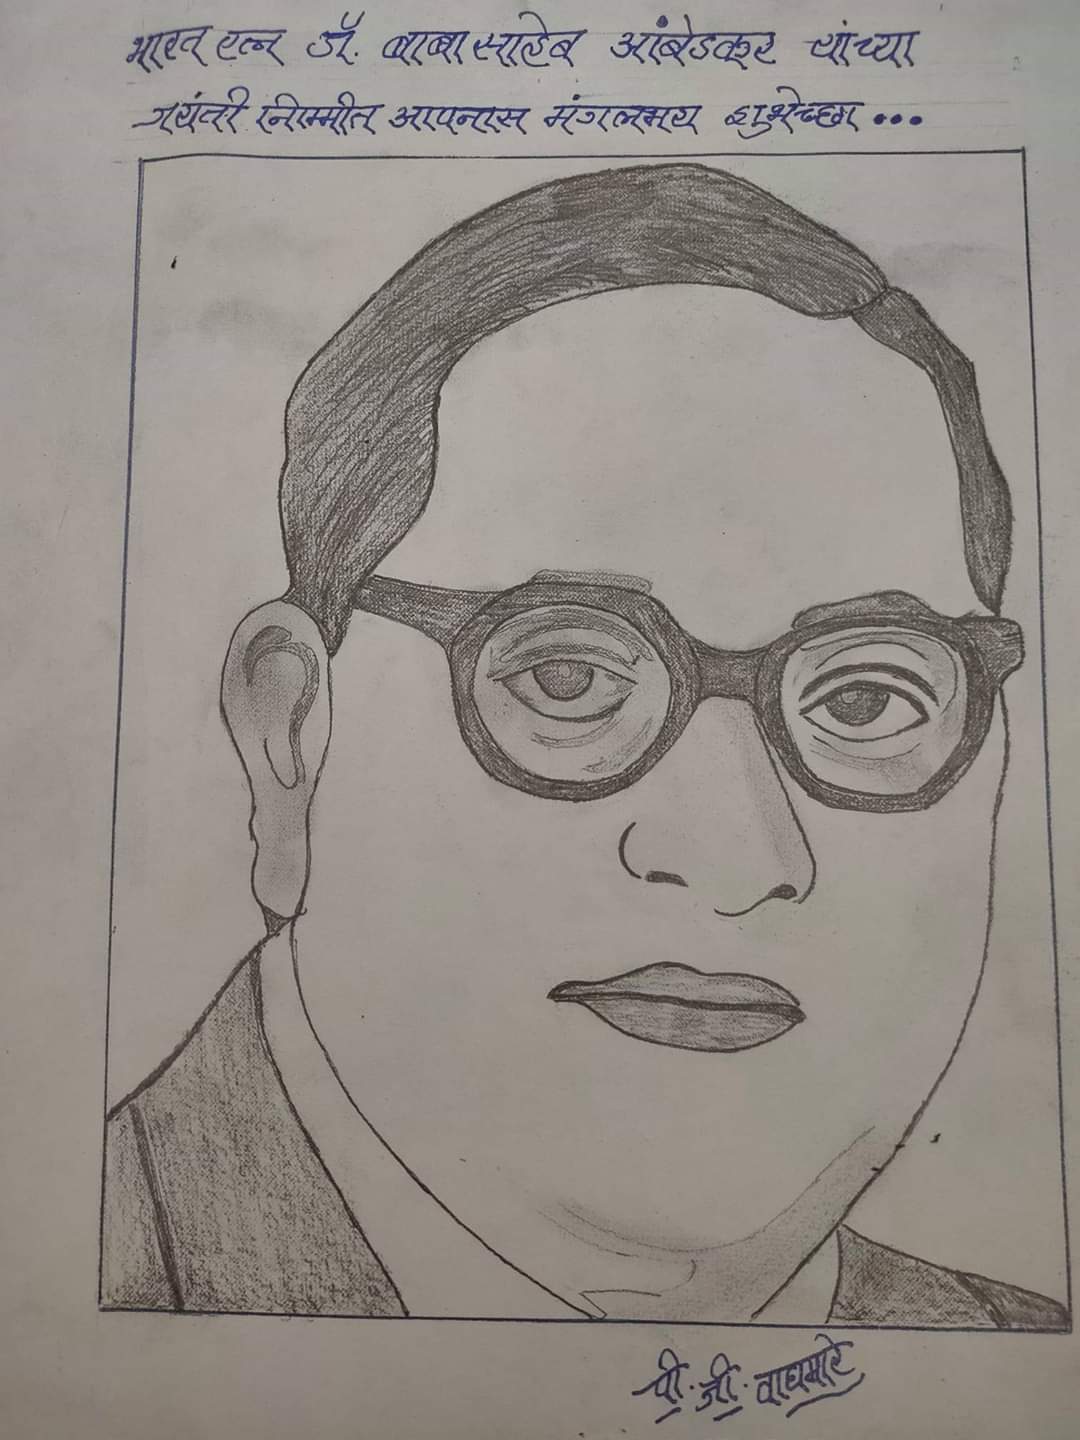 Essay On Dr Babasaheb Ambedkar in English for Classes 13 10 Lines Short   Long Paragraph